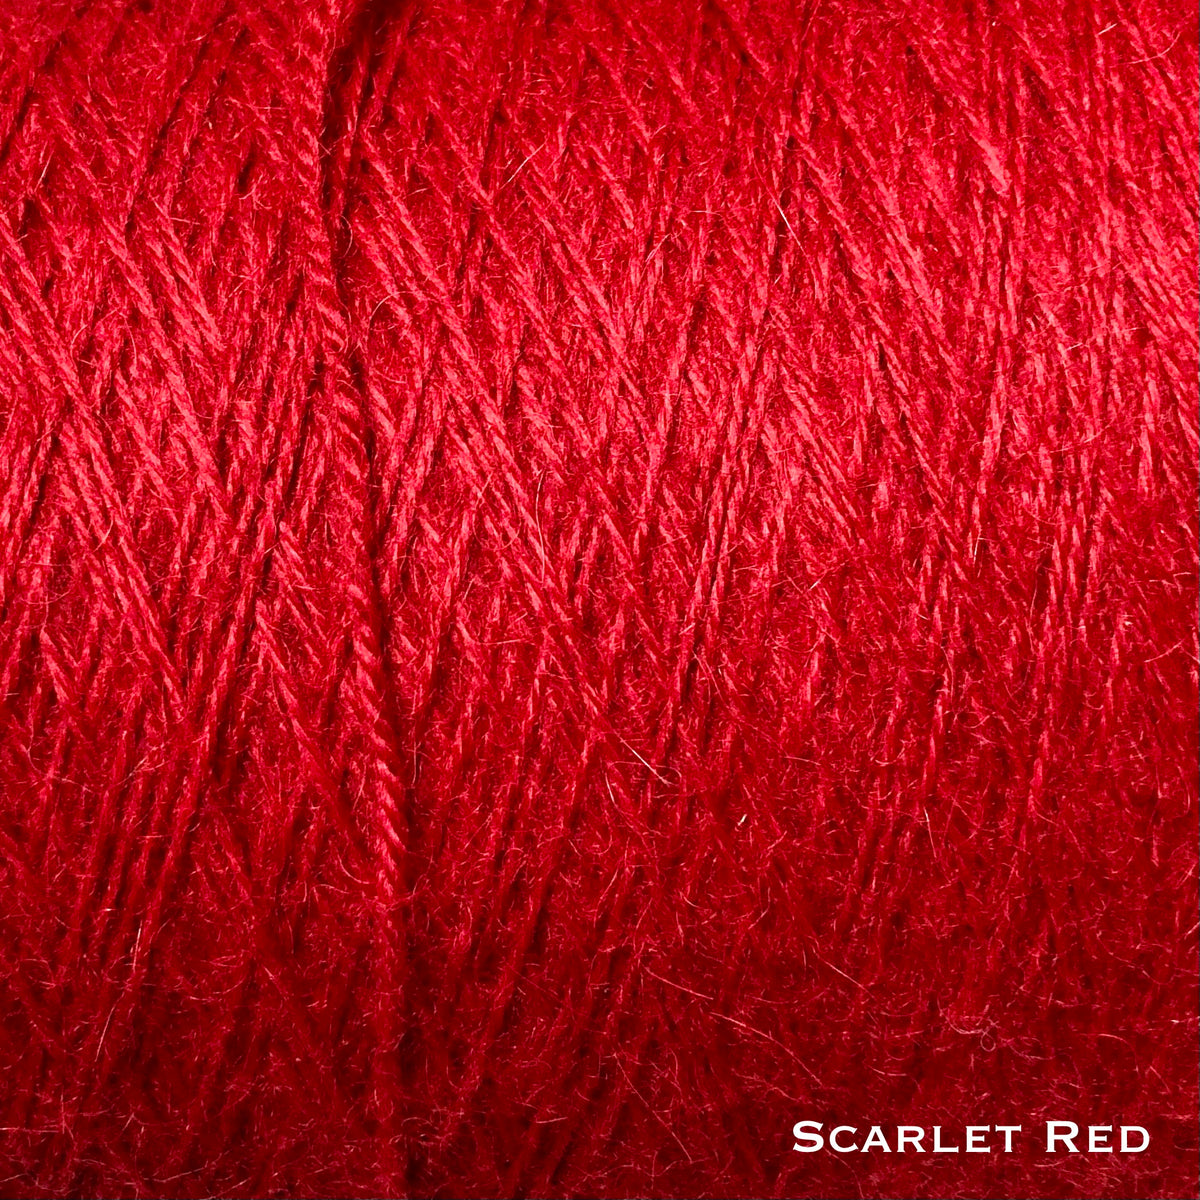 scarlet red sport weight alpaca wool yarn for knitting and crochet